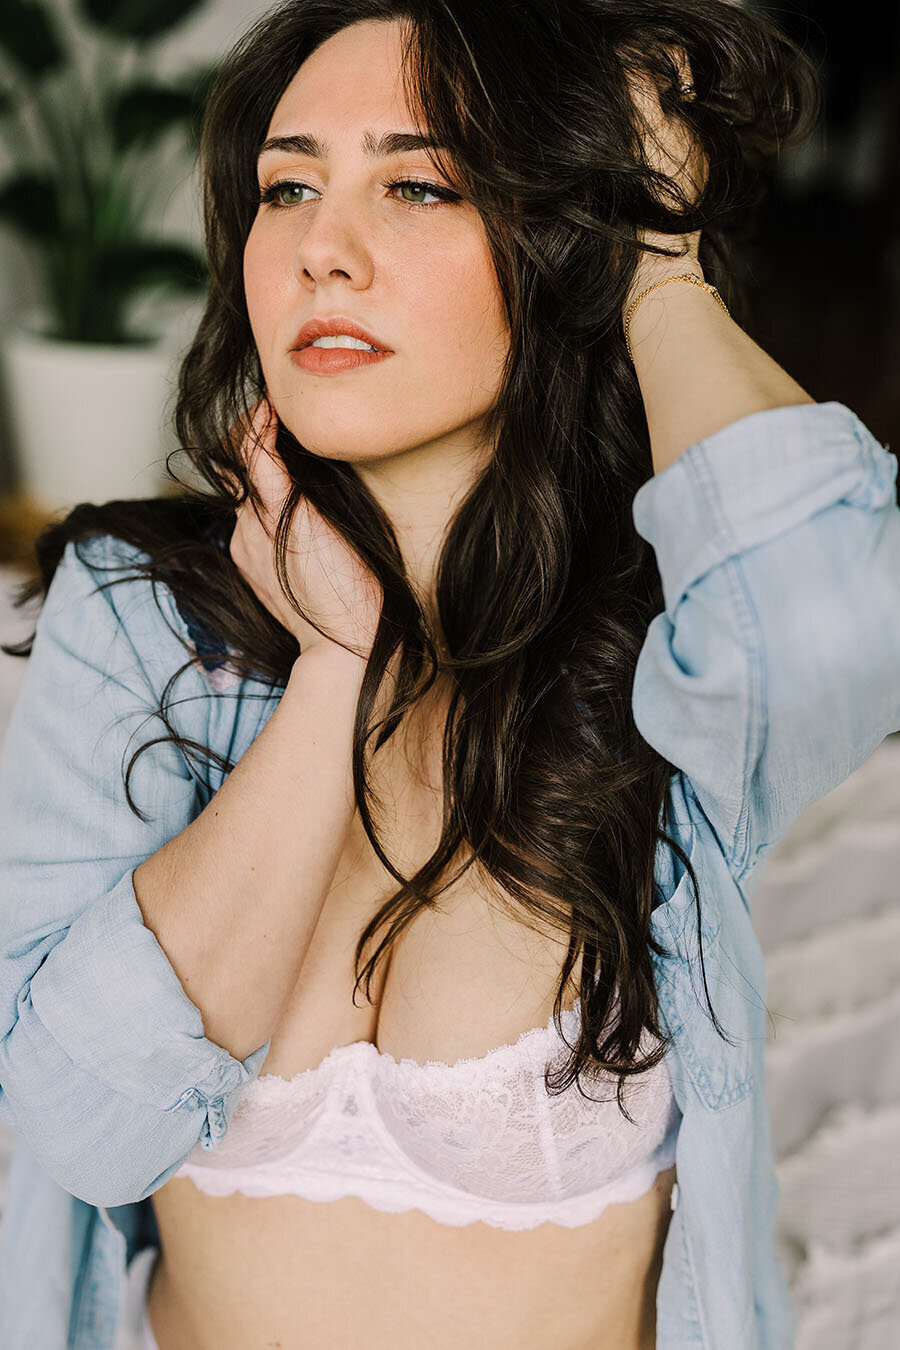 A boudoir shoot with white lingerie and a chambray button down shirt.